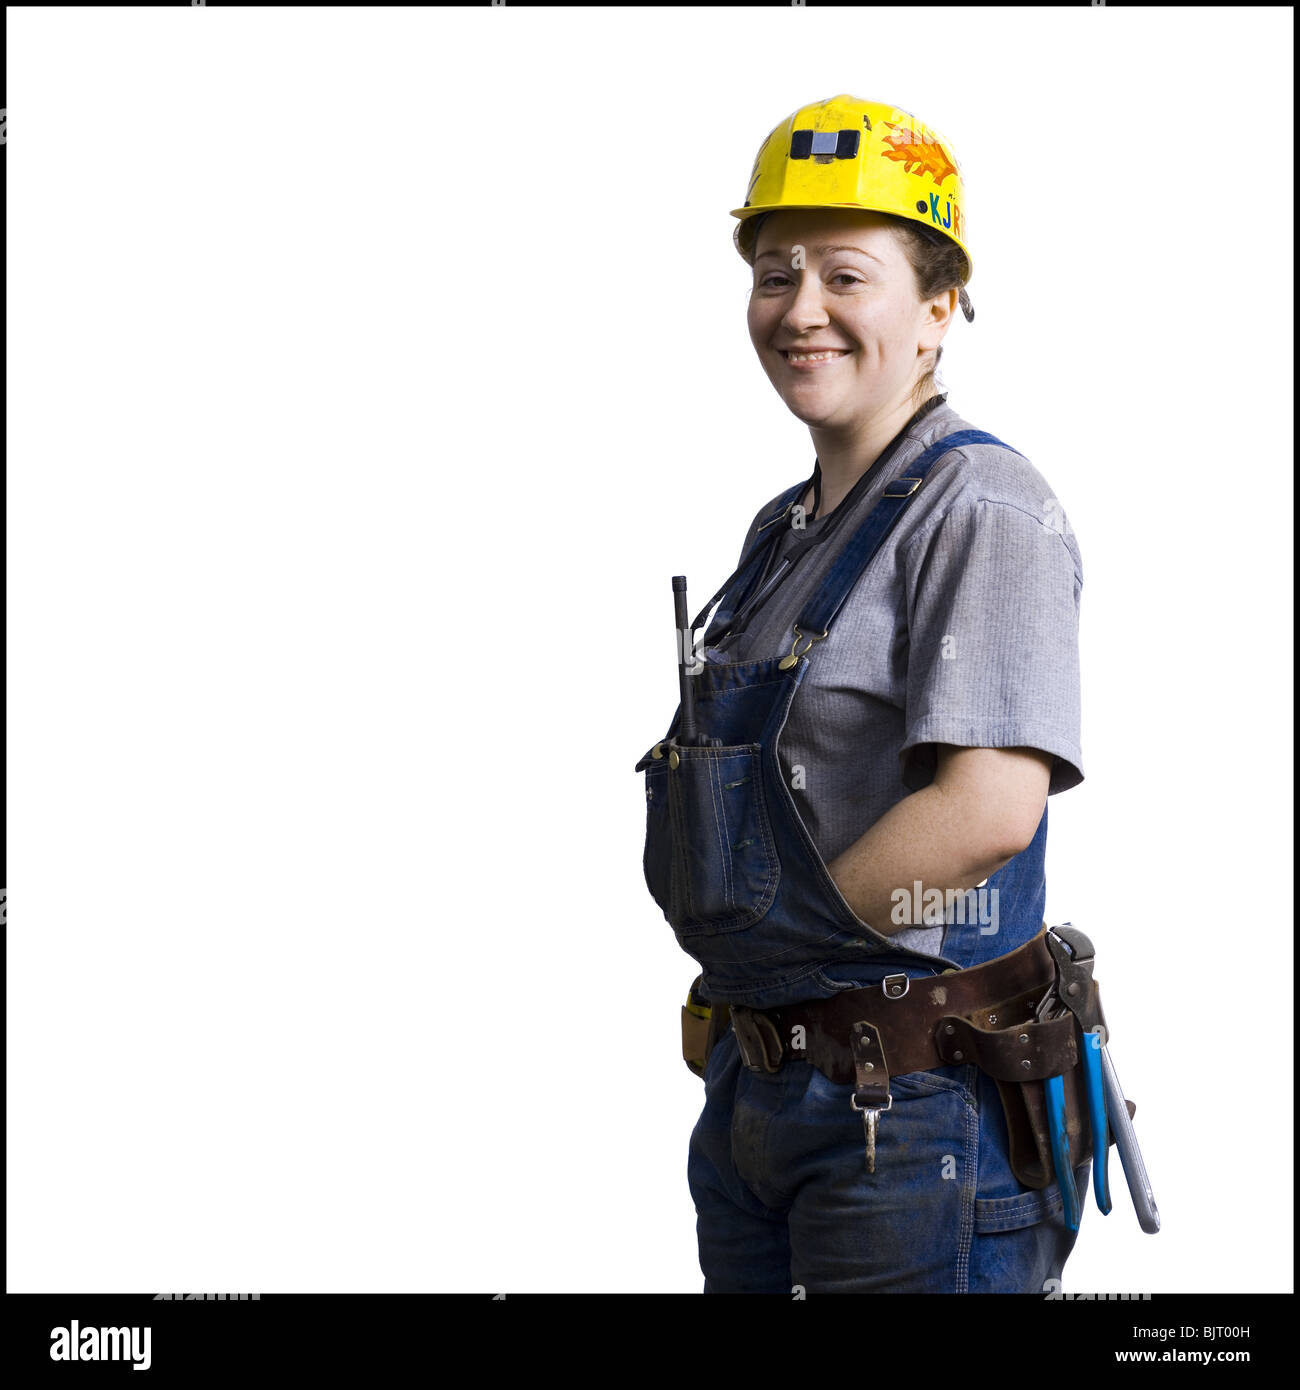 Female construction worker with hardhat Stock Photo